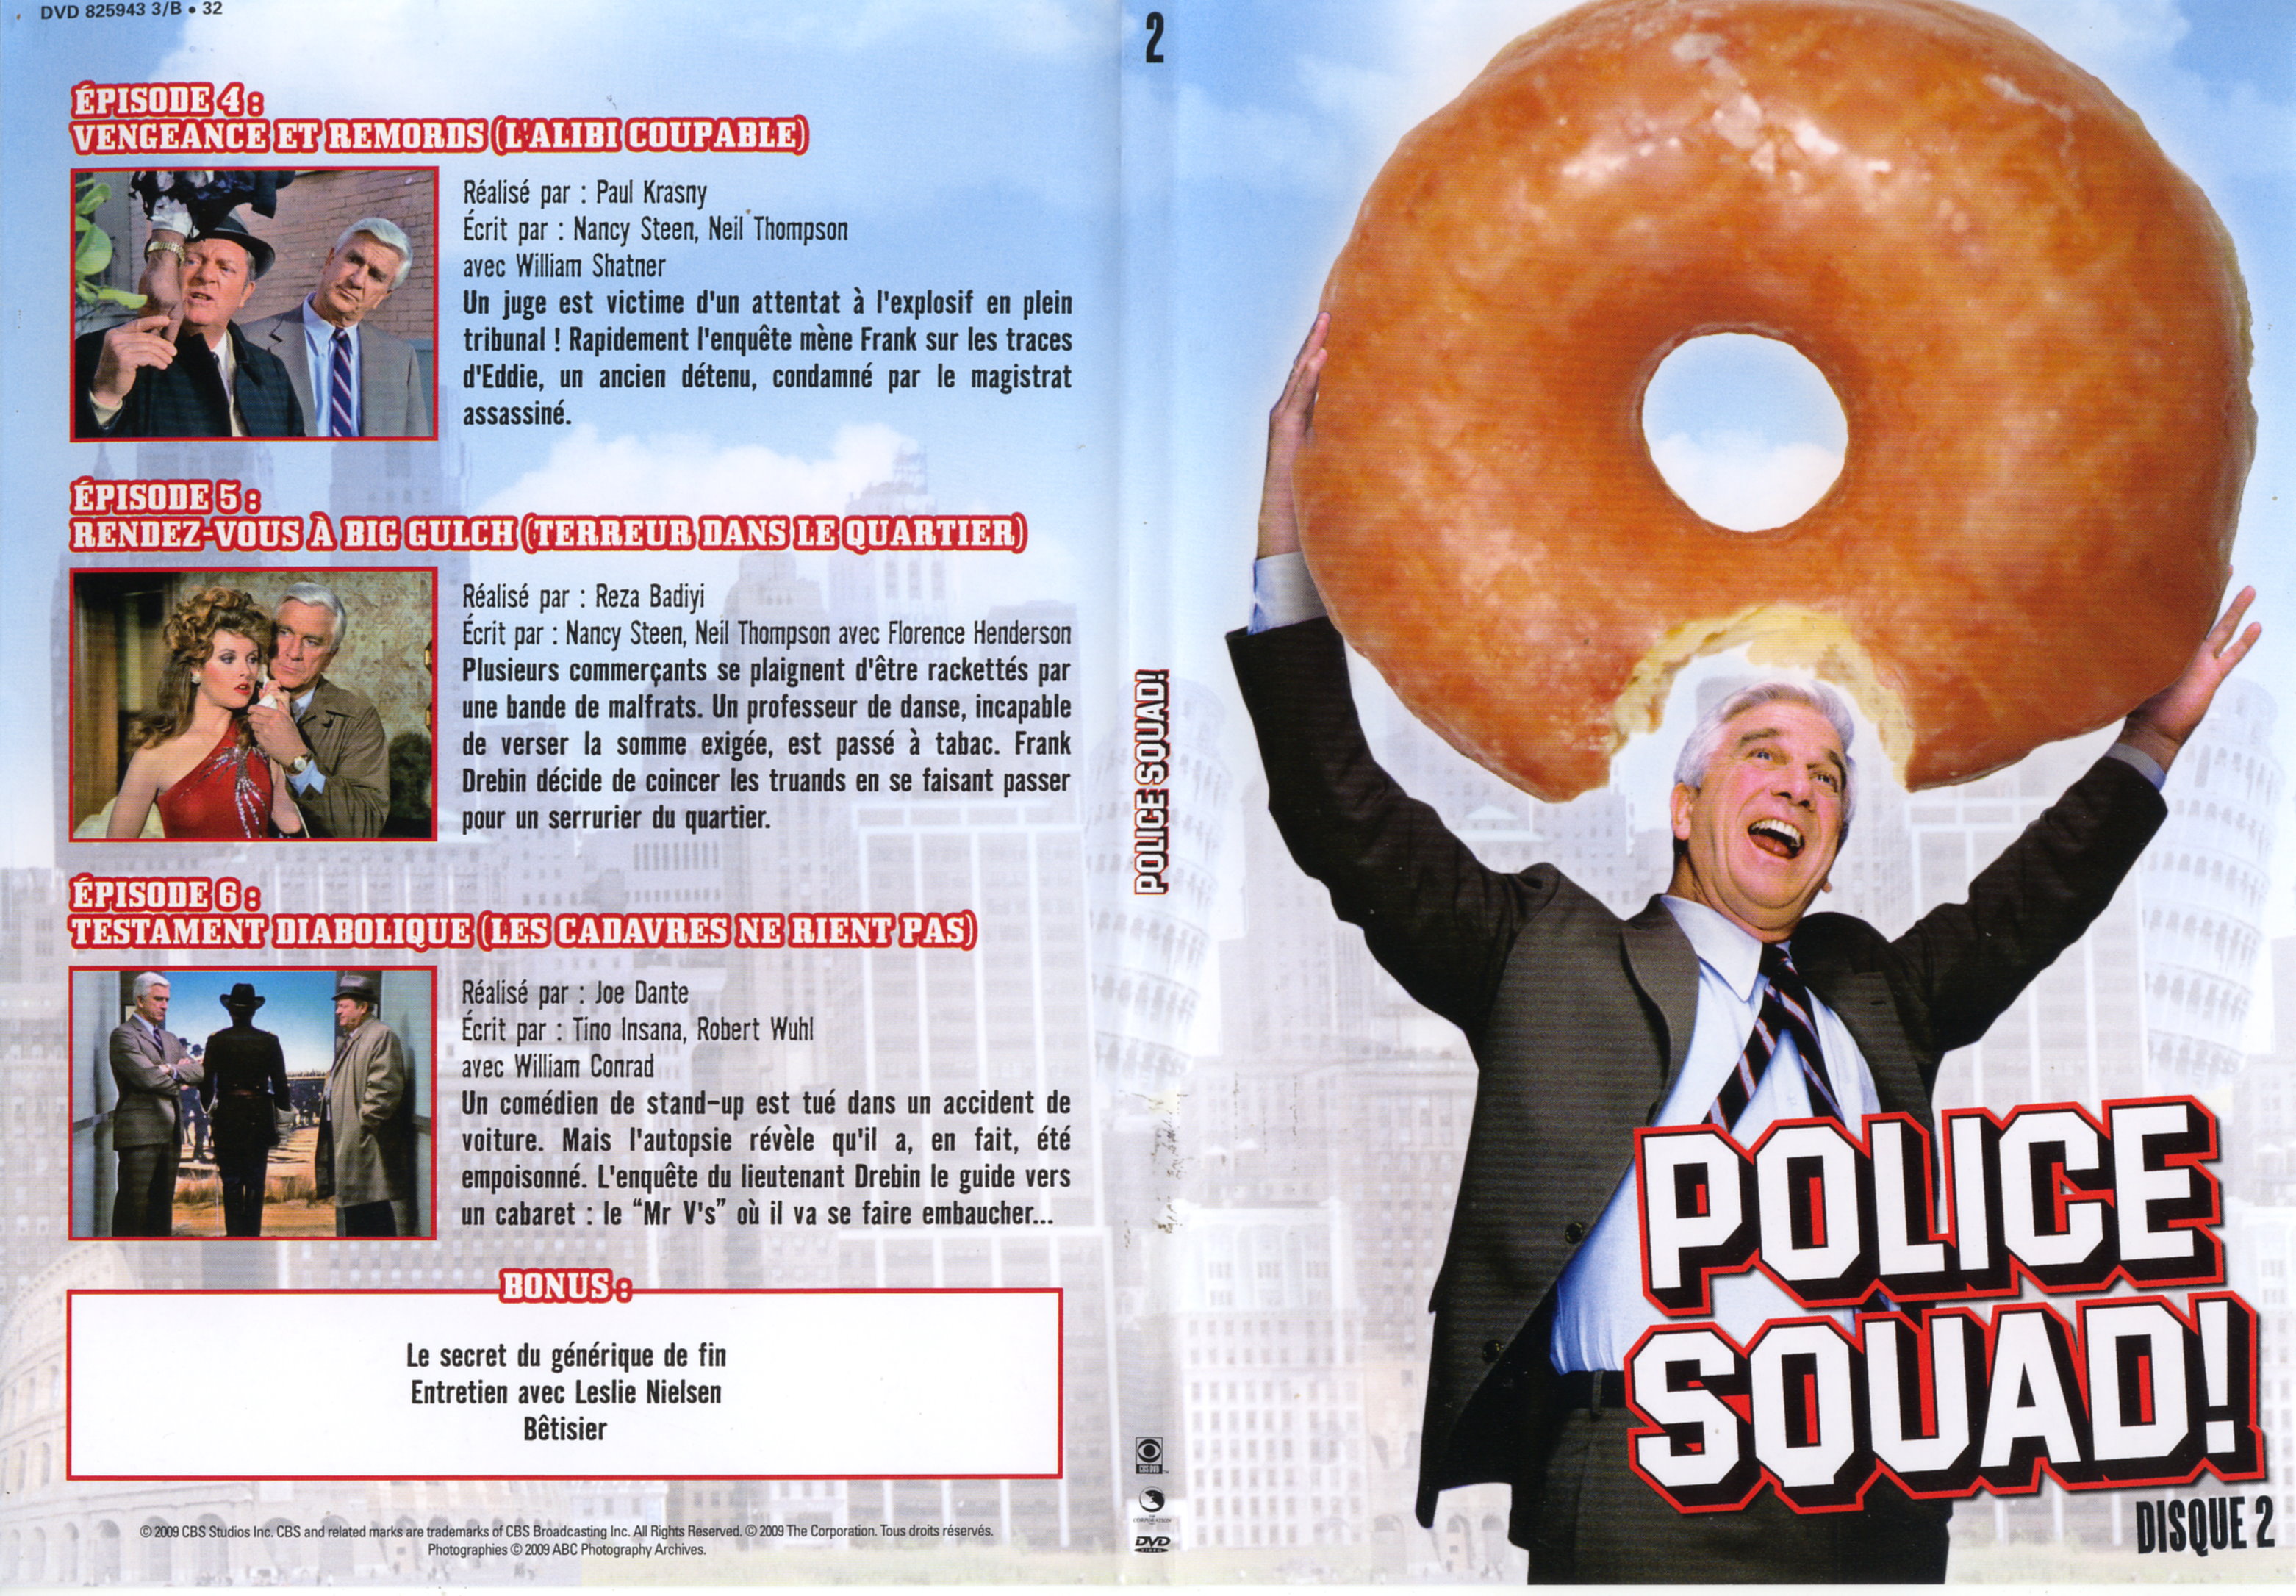 Jaquette DVD Police squad DVD 2